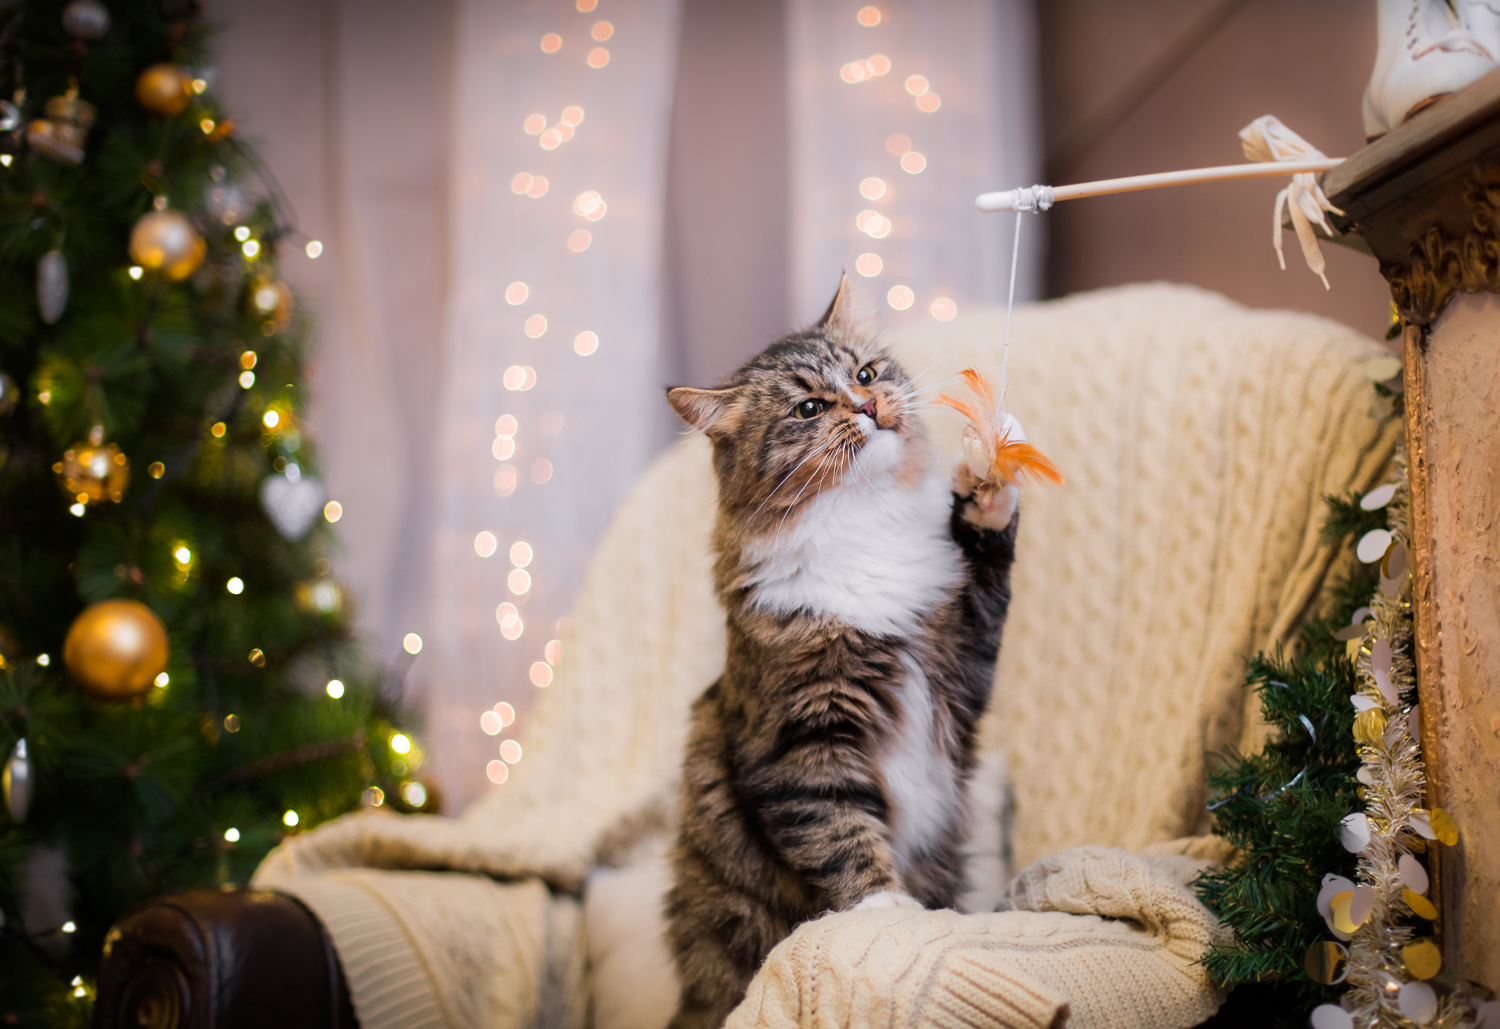 Cat in Holday Scene - Tips to keep your pets safe during the holiday season